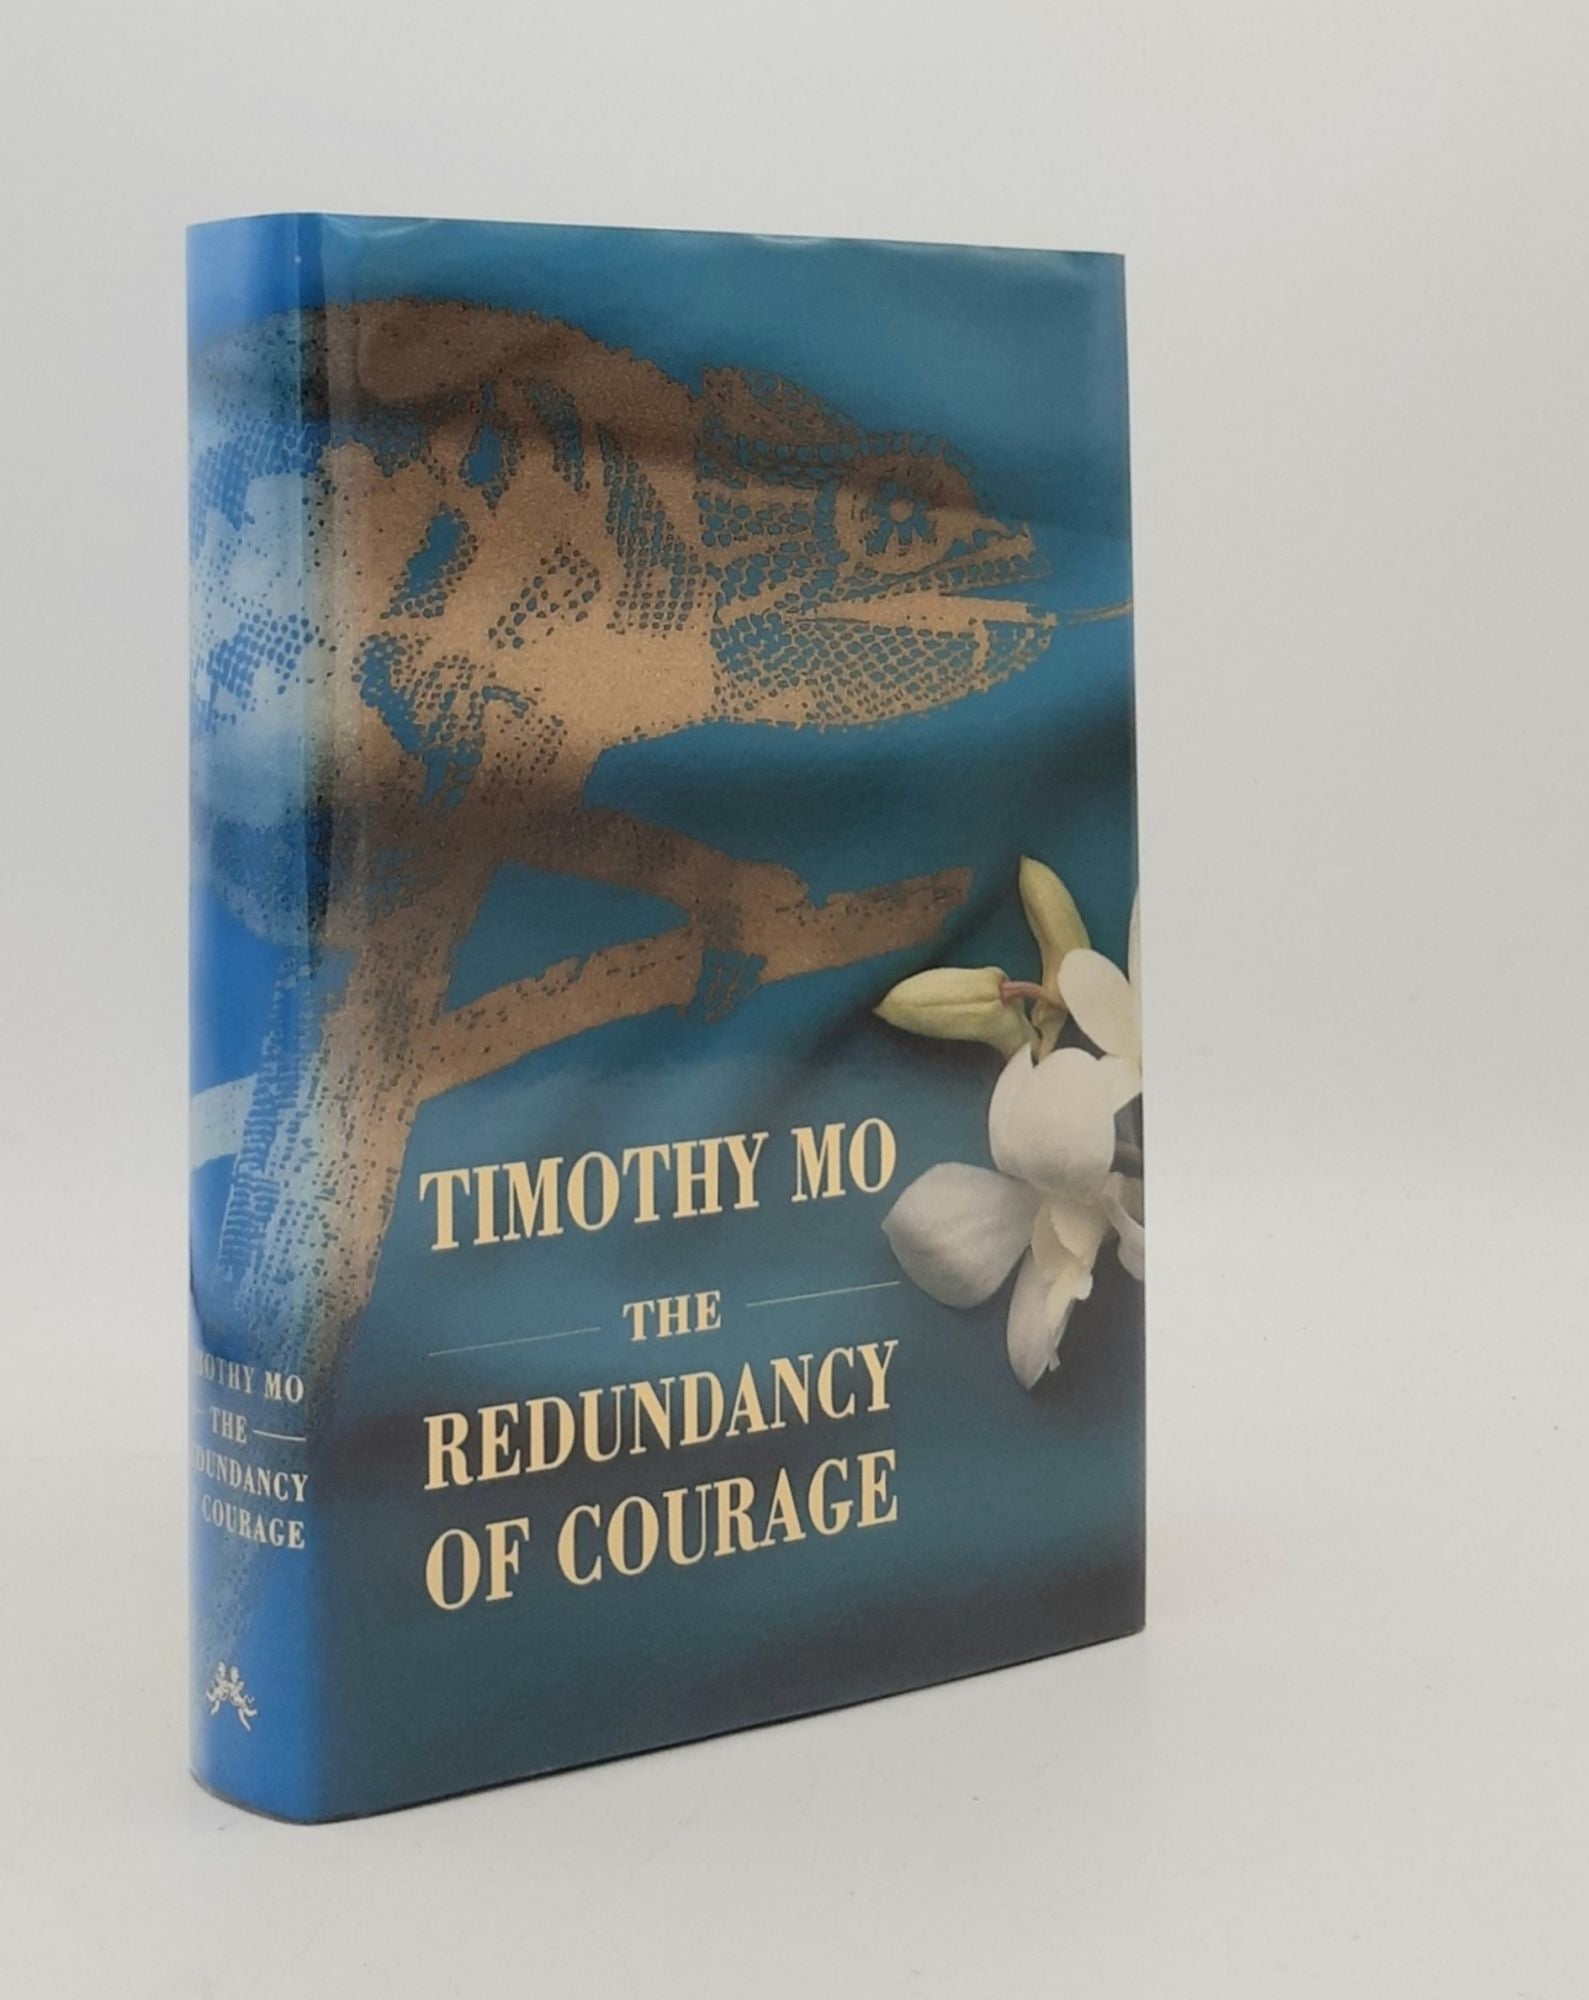 MO Timothy - The Redundancy of Courage